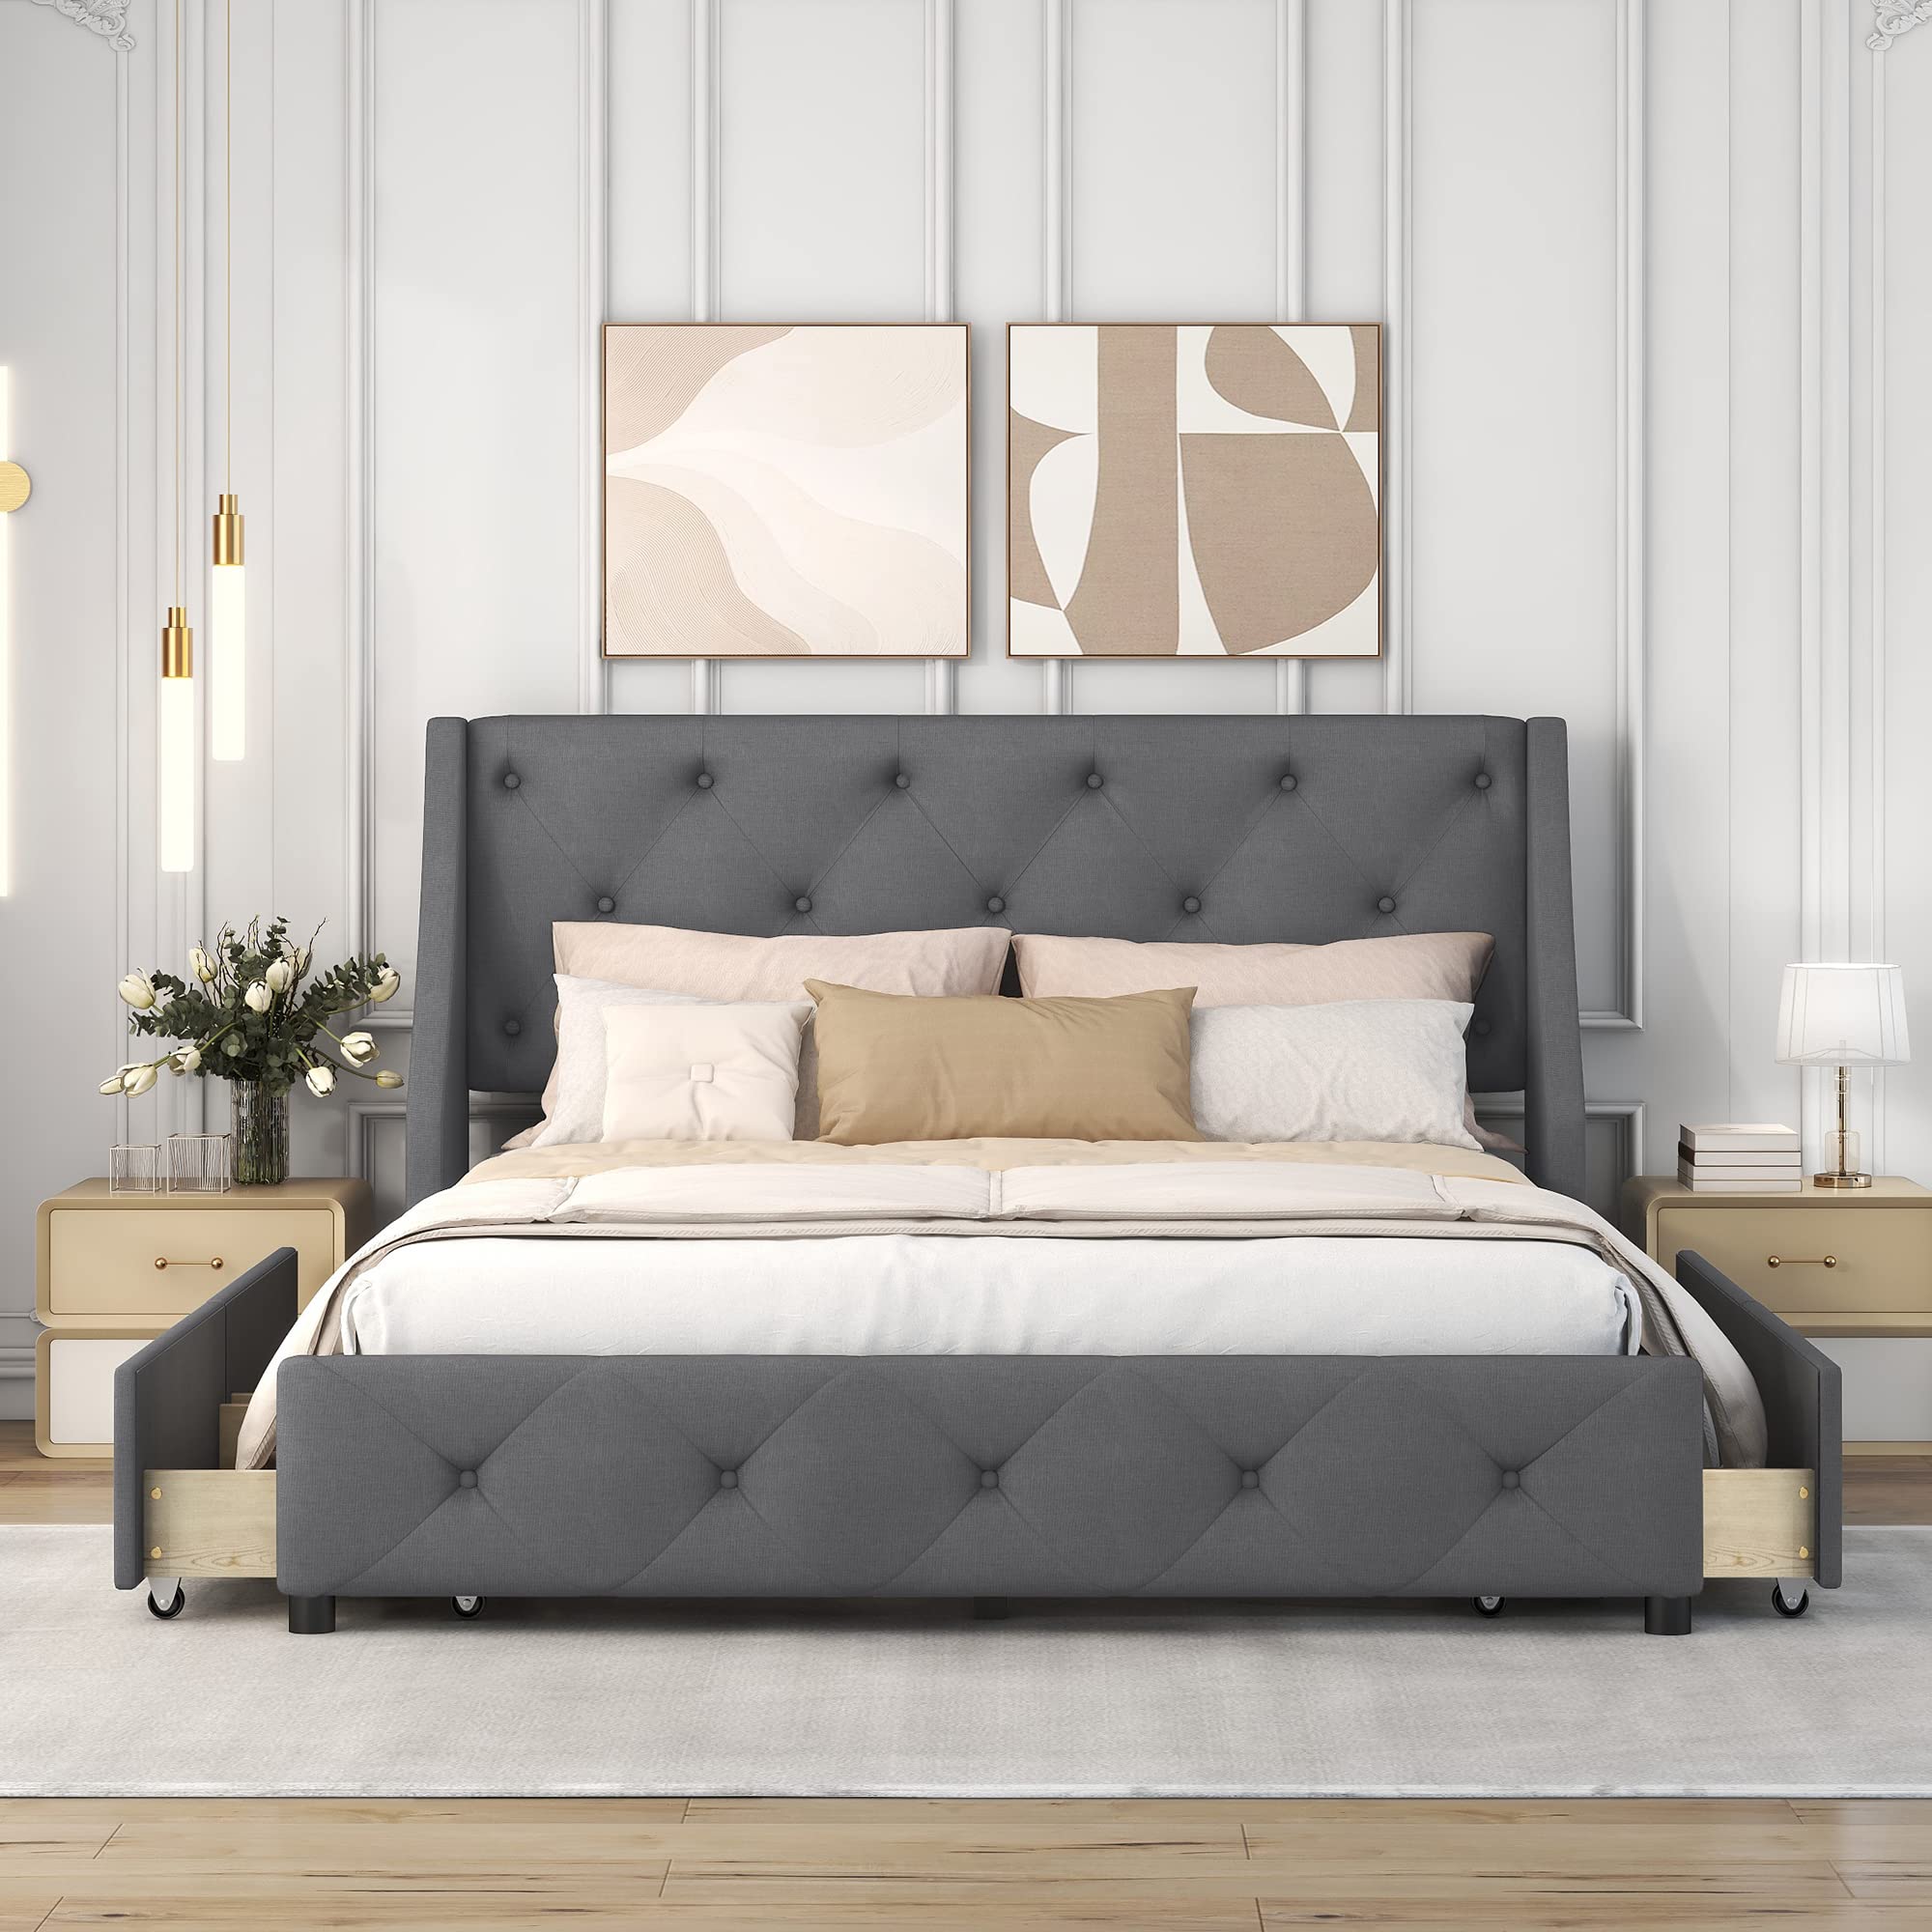 Merax Modern Queen Upholstered Platform Bed Frame with 4 Storage Drawers/No Box Spring Needed/Easy Assembly, Gray